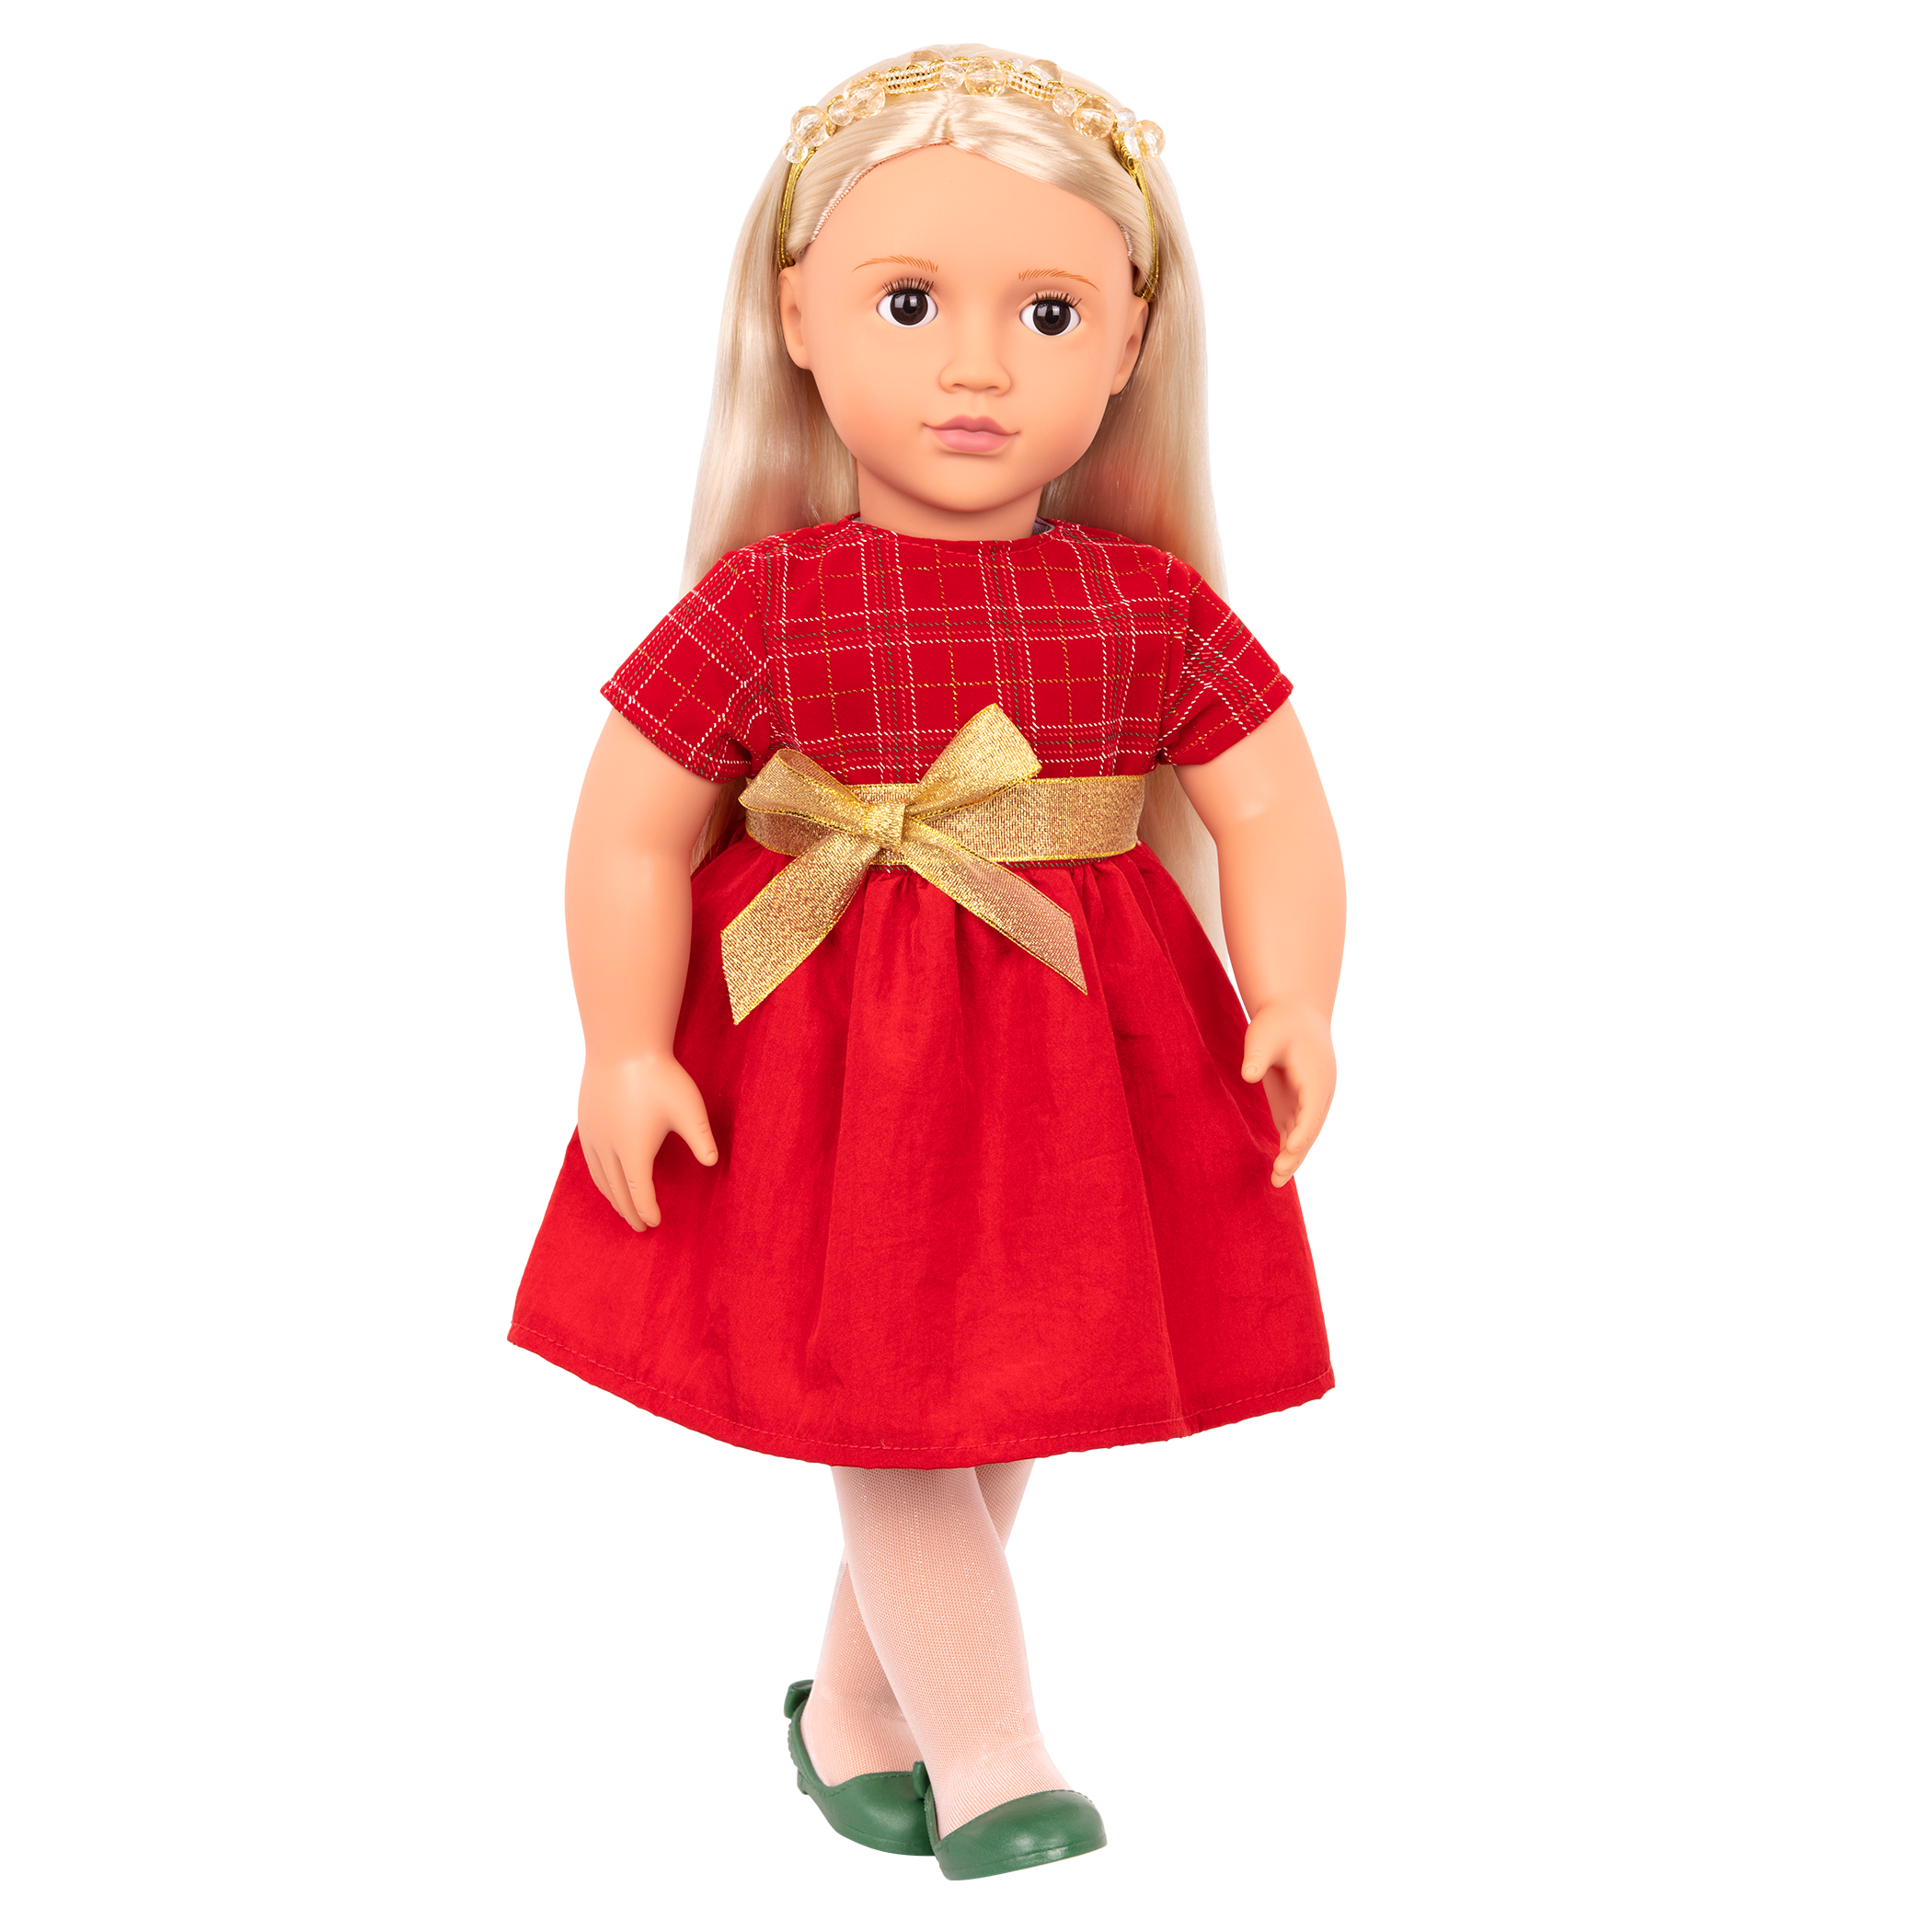 18-inch holiday doll with blonde hair and dark brown eyes